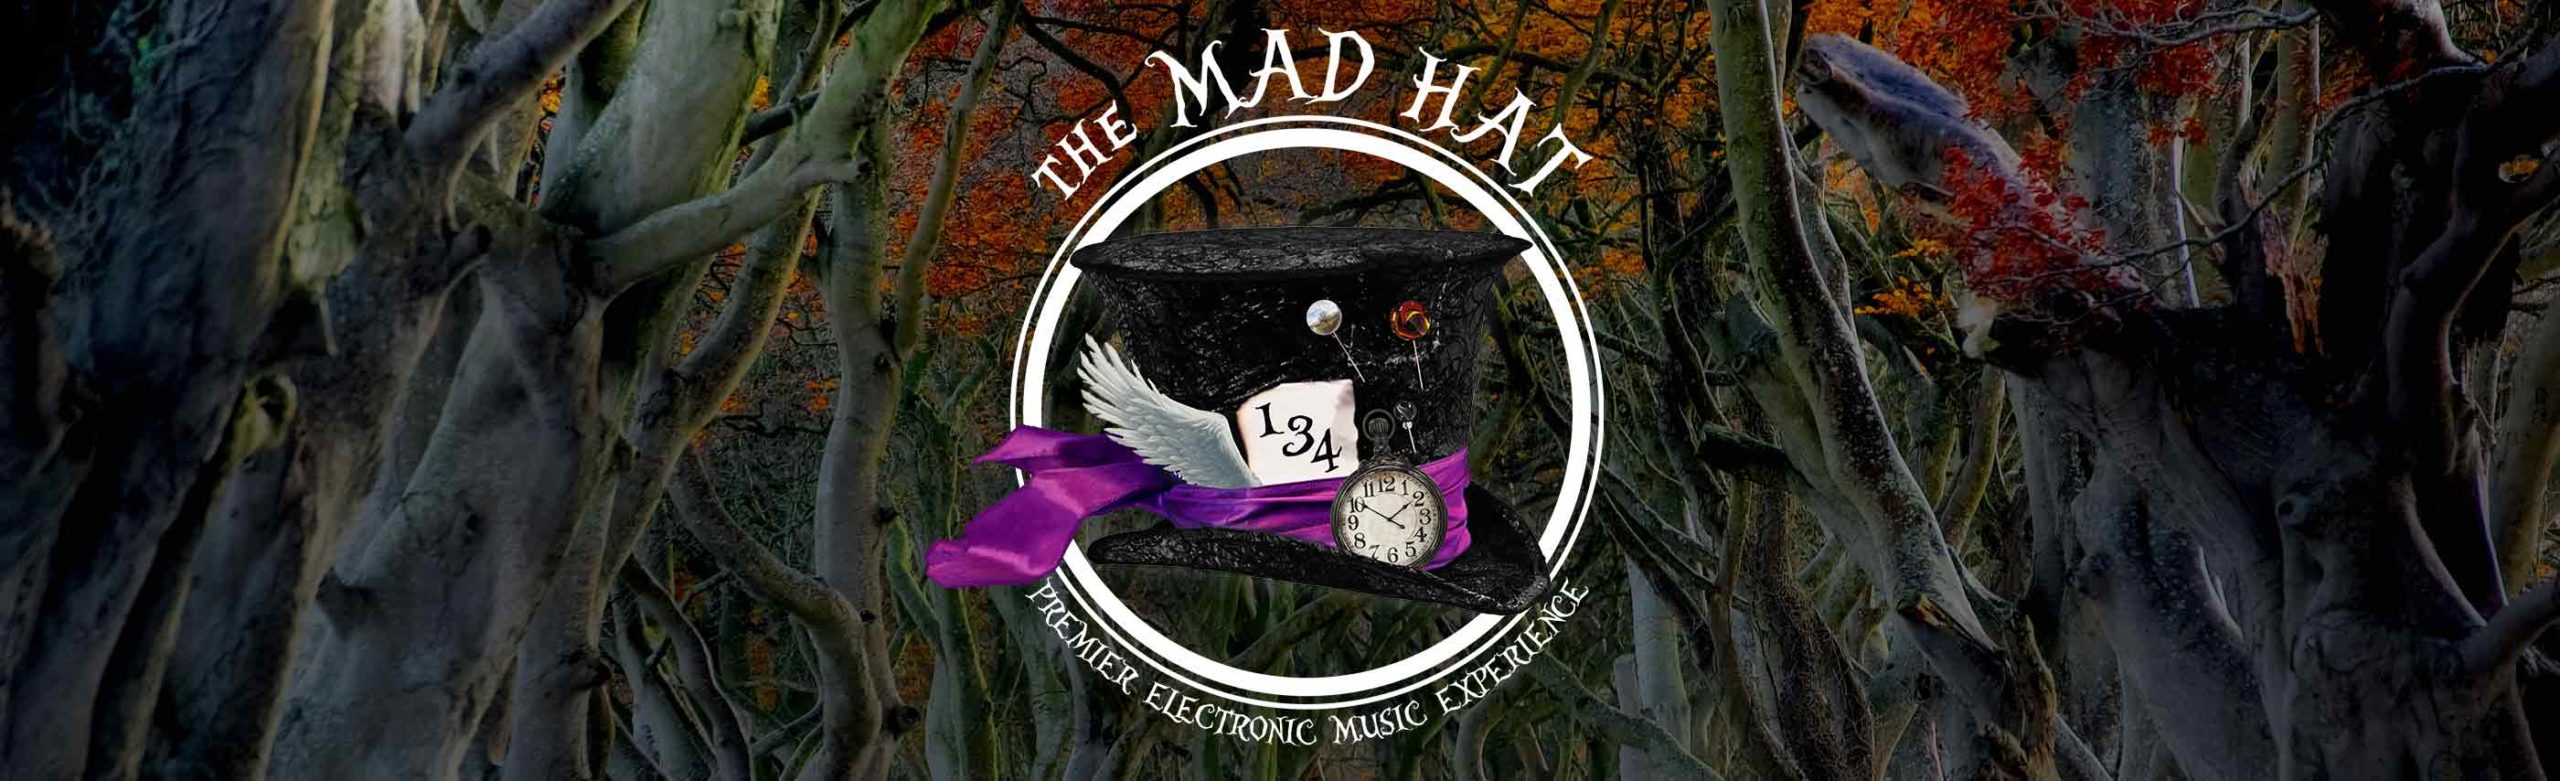 The Mad Hat Electronic Music Series Returns Autumn 2018 Image